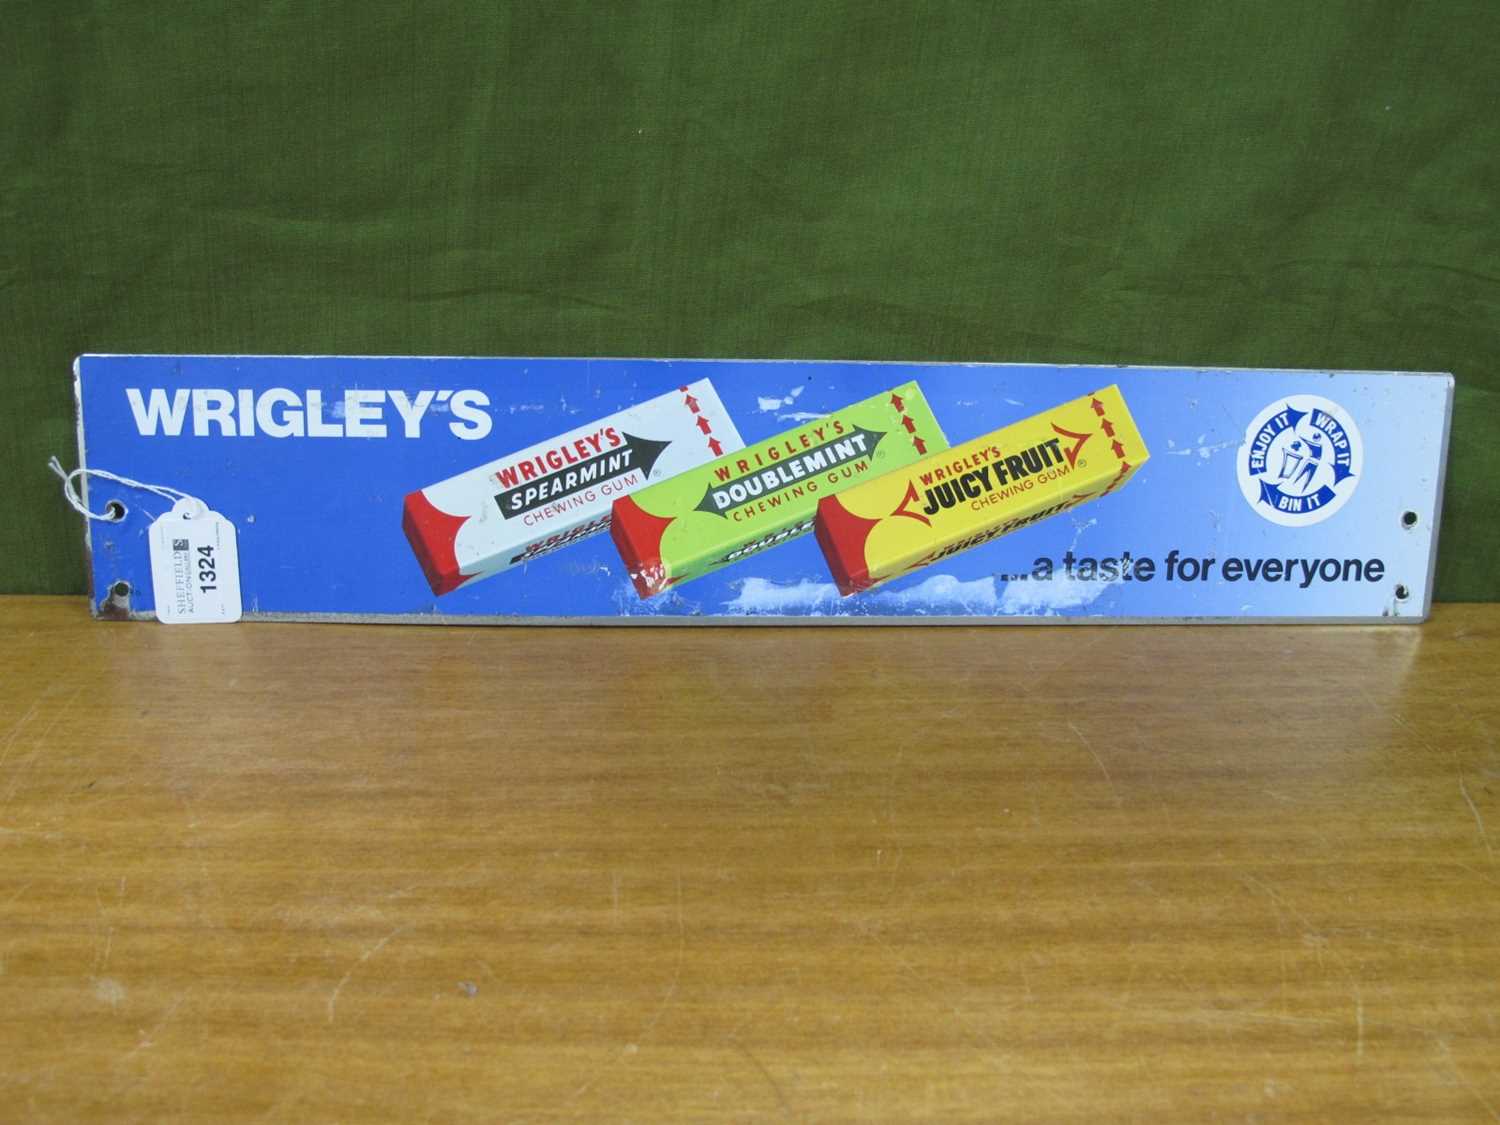 An Original Metal Advertising Sign for Wrigley's Chewing Gum, (52cm x 10cm).